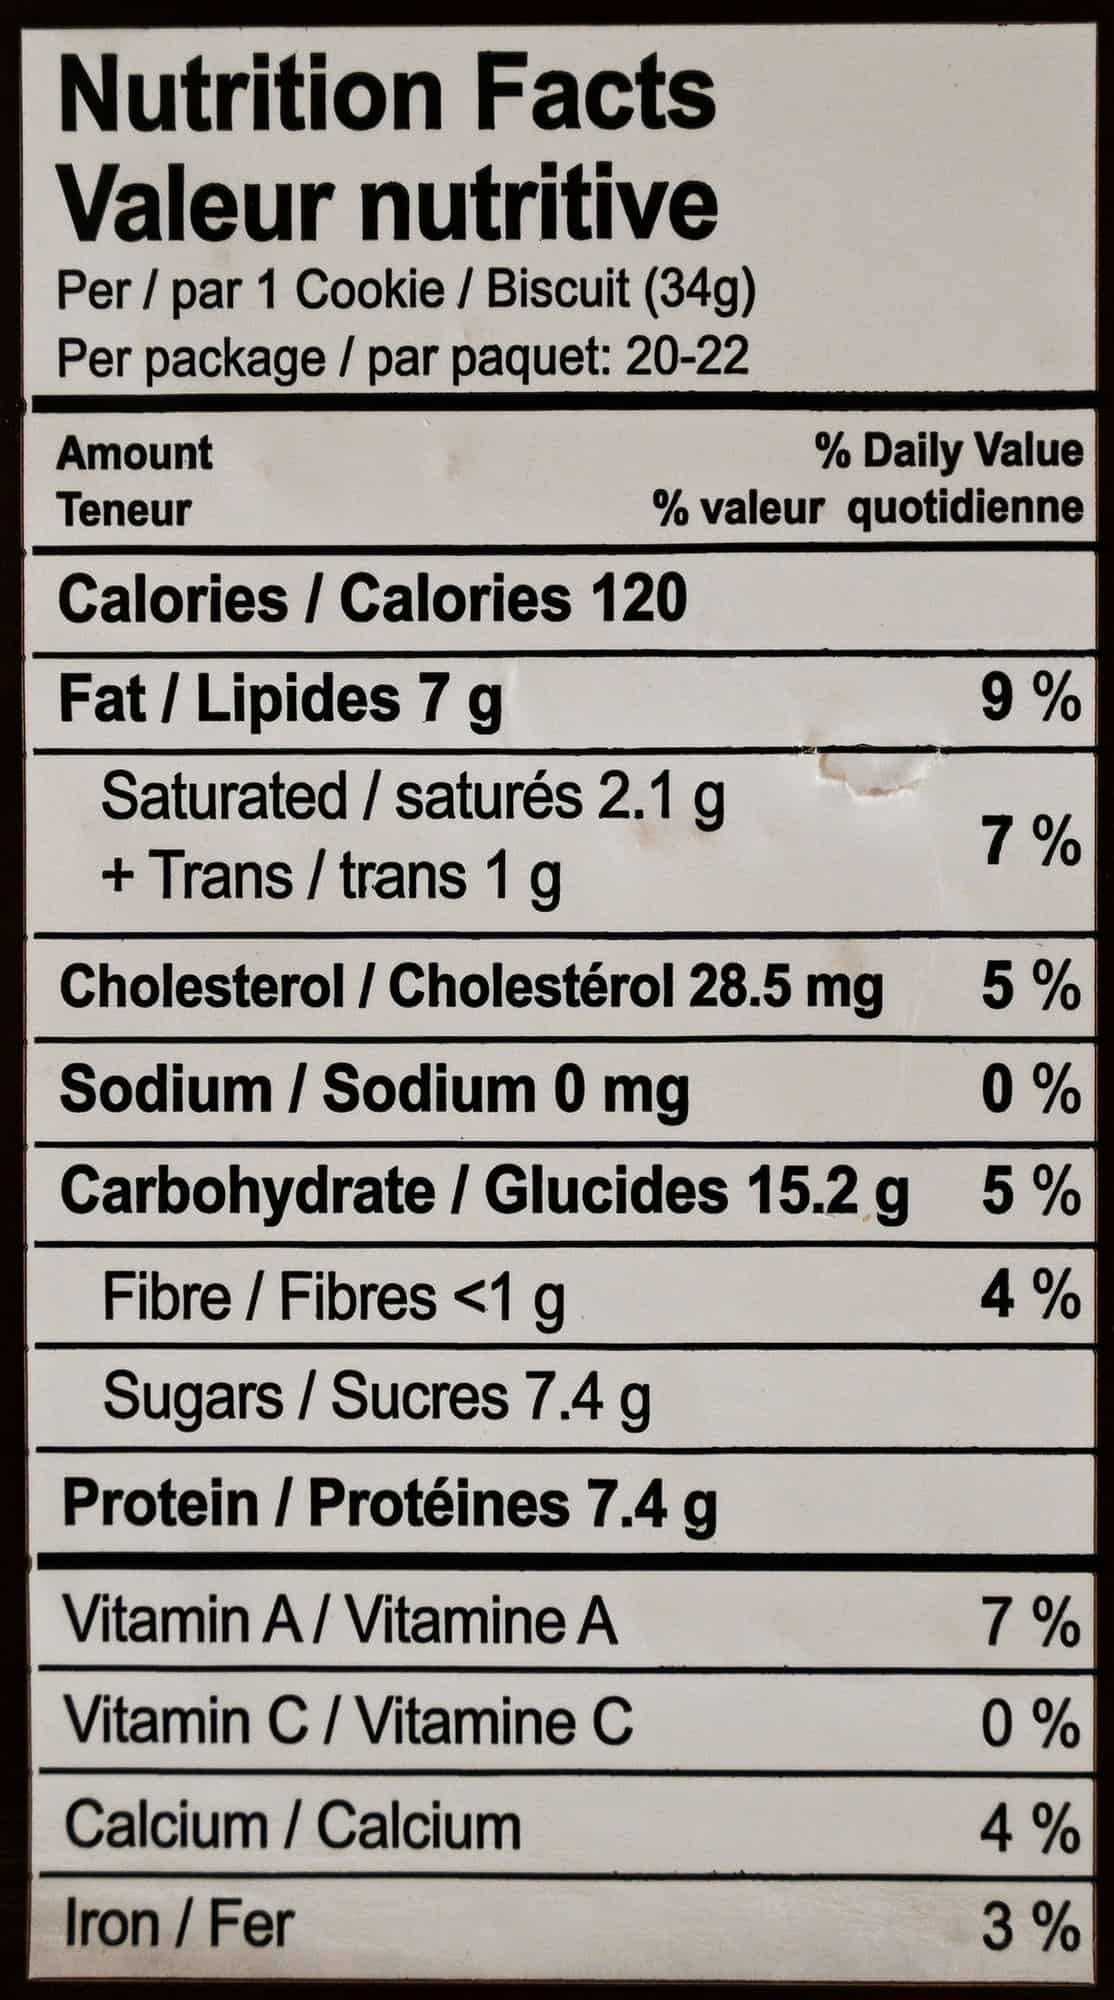 Cake rusks nutrition facts from the package.